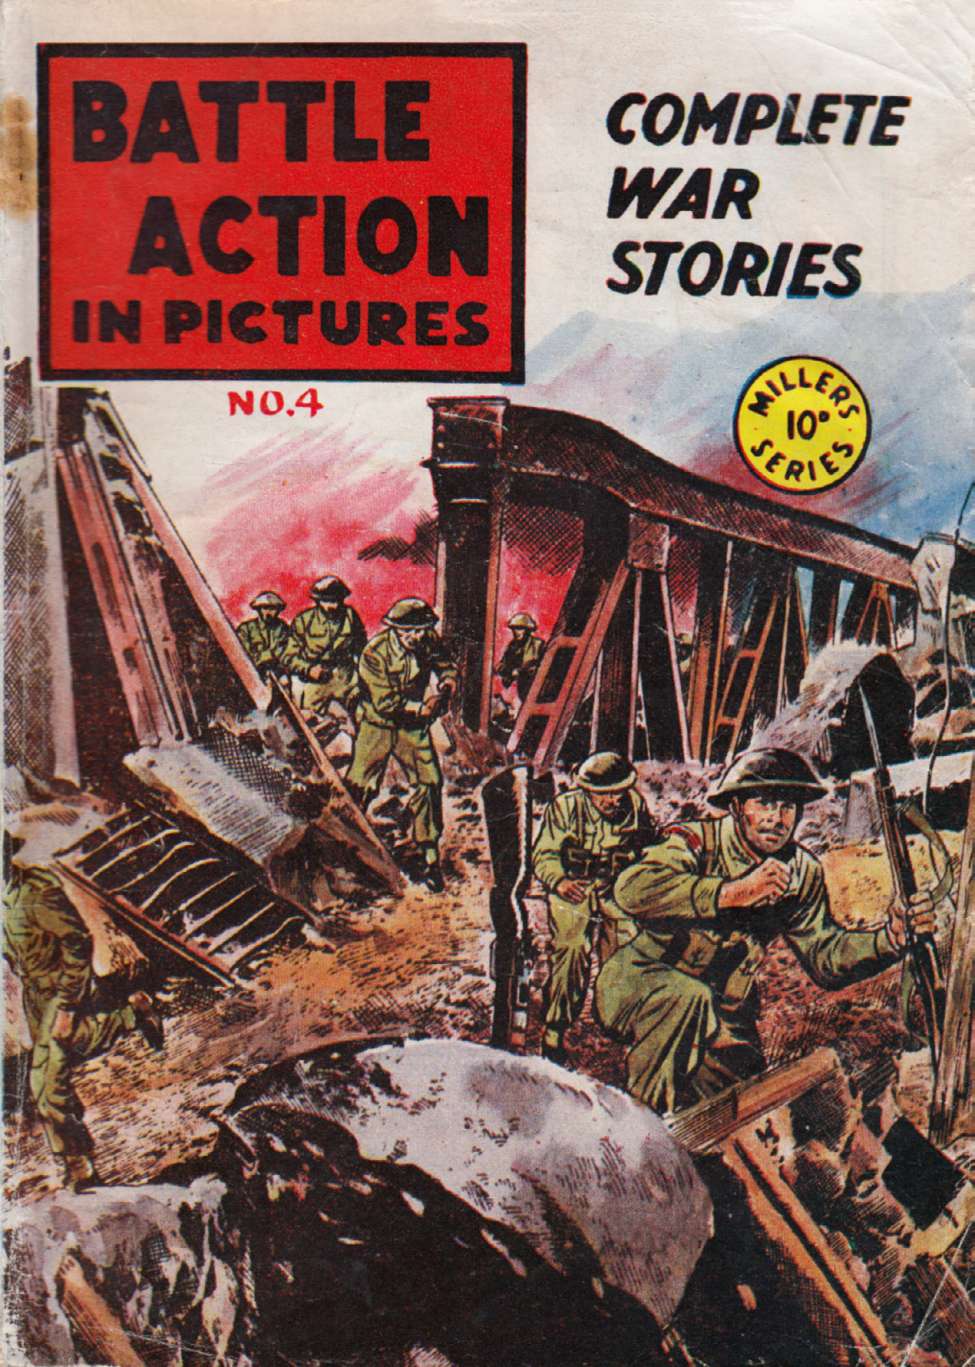 Book Cover For Battle Action in Pictures 4